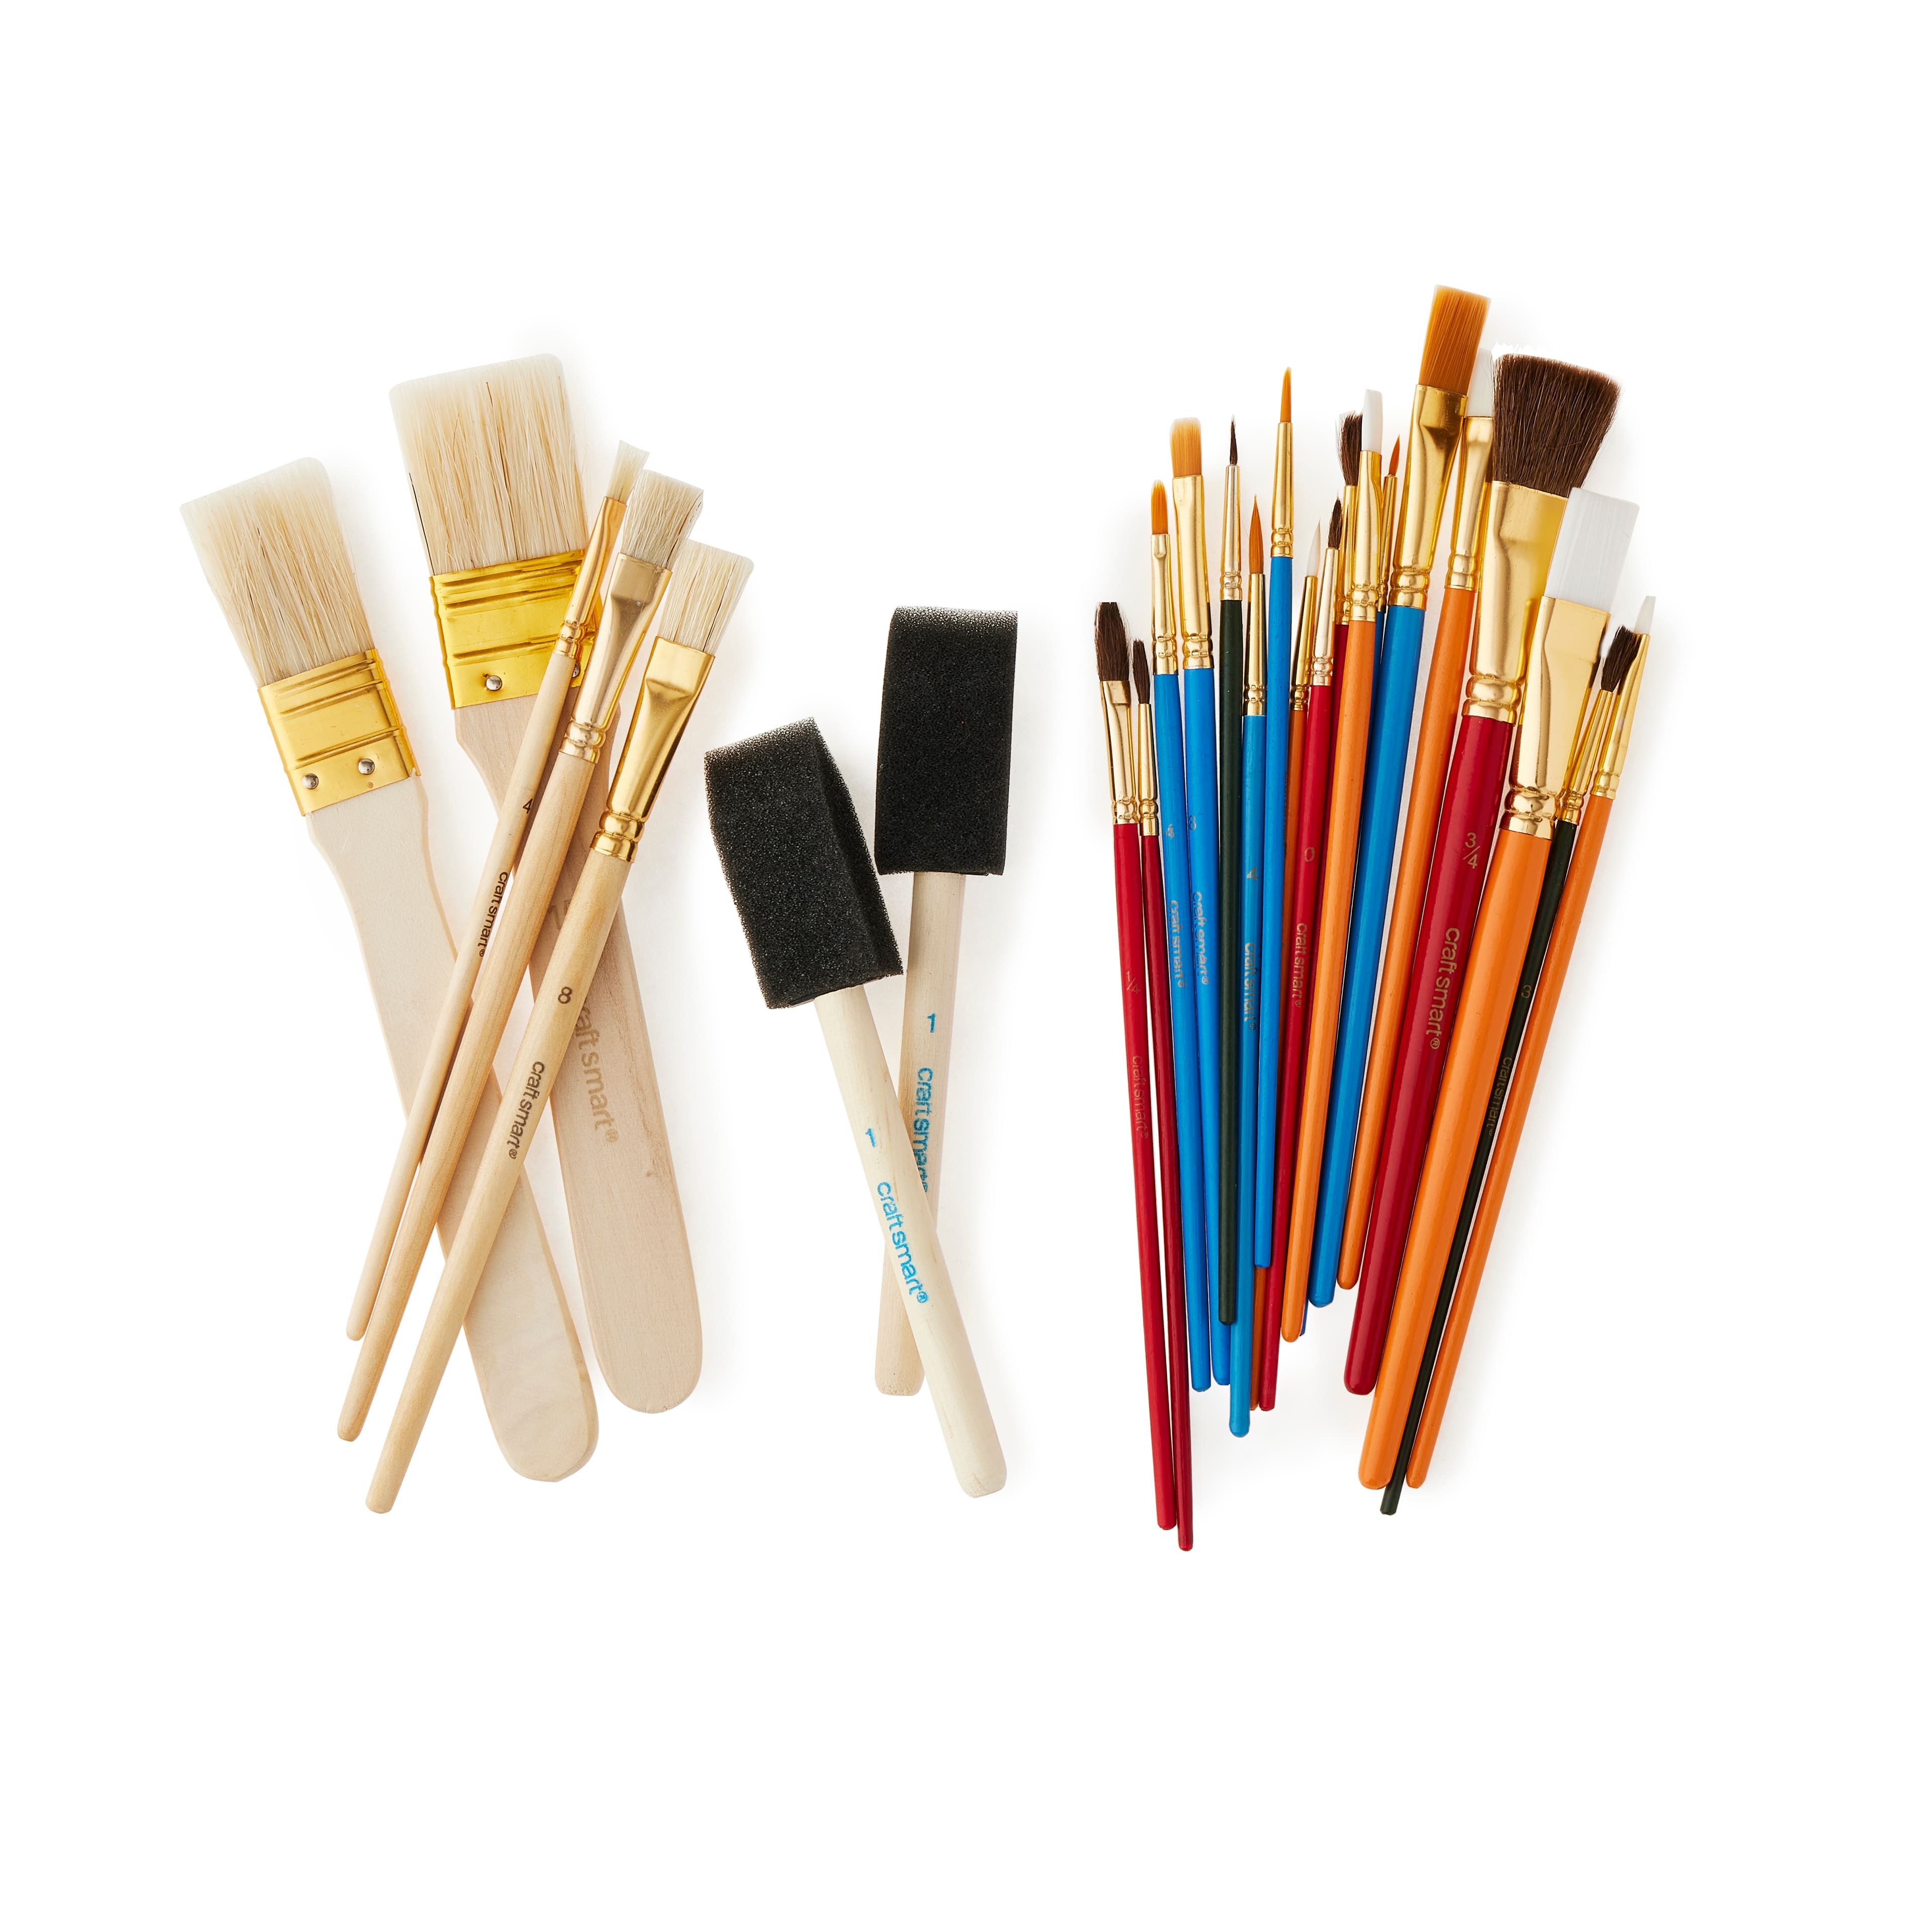 12 Packs: 5 Ct. (60 Total) All-Purpose Brush Set by Craft Smart | Michaels